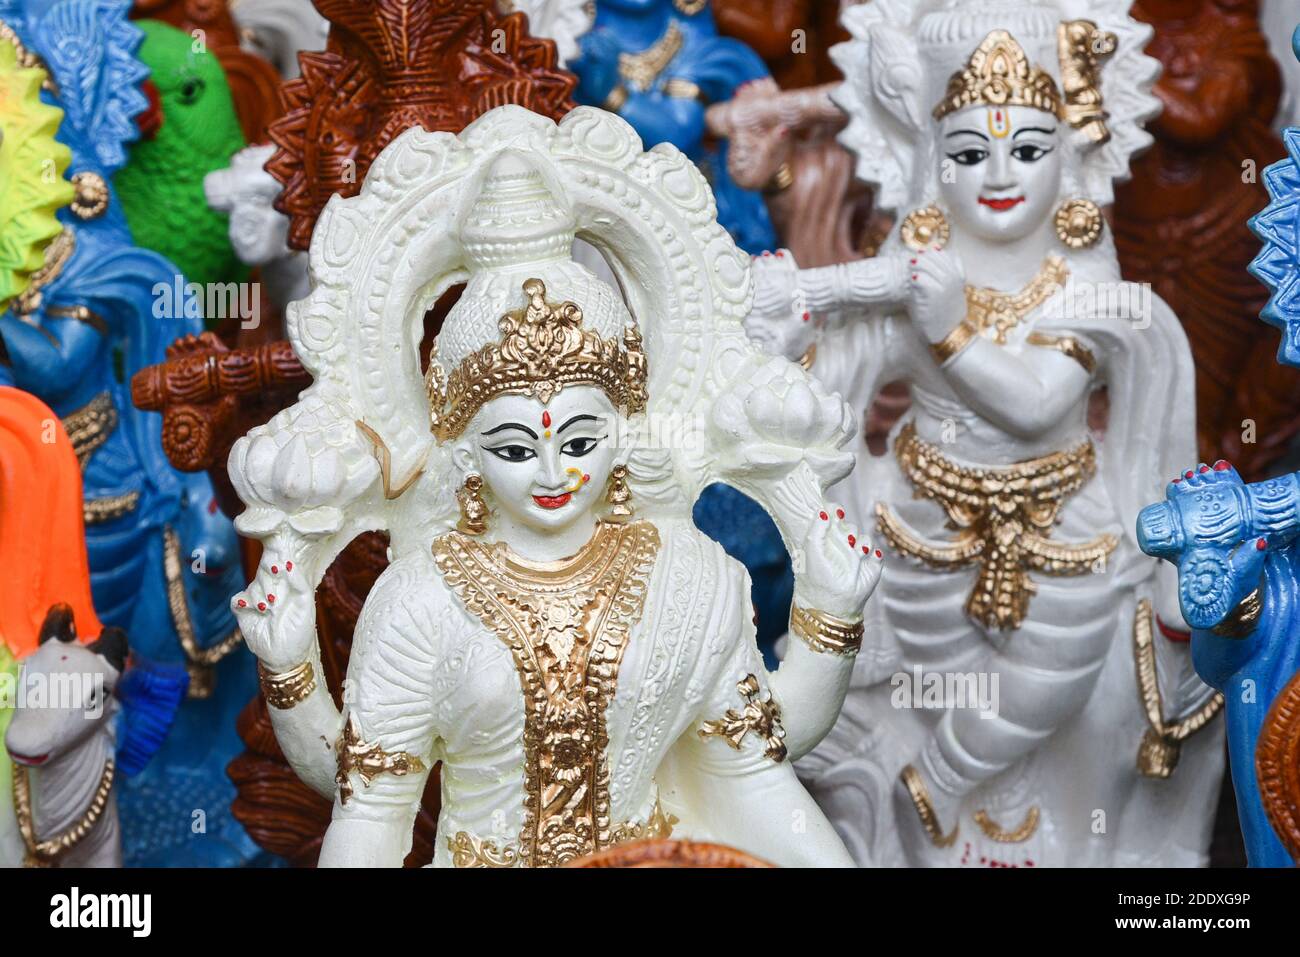 Many colorful statue sculptures of Hindu god, lord Krishna in an street shop, Delhi, India. popular Indian divinity worshiped celebrated as Janmashtam Stock Photo